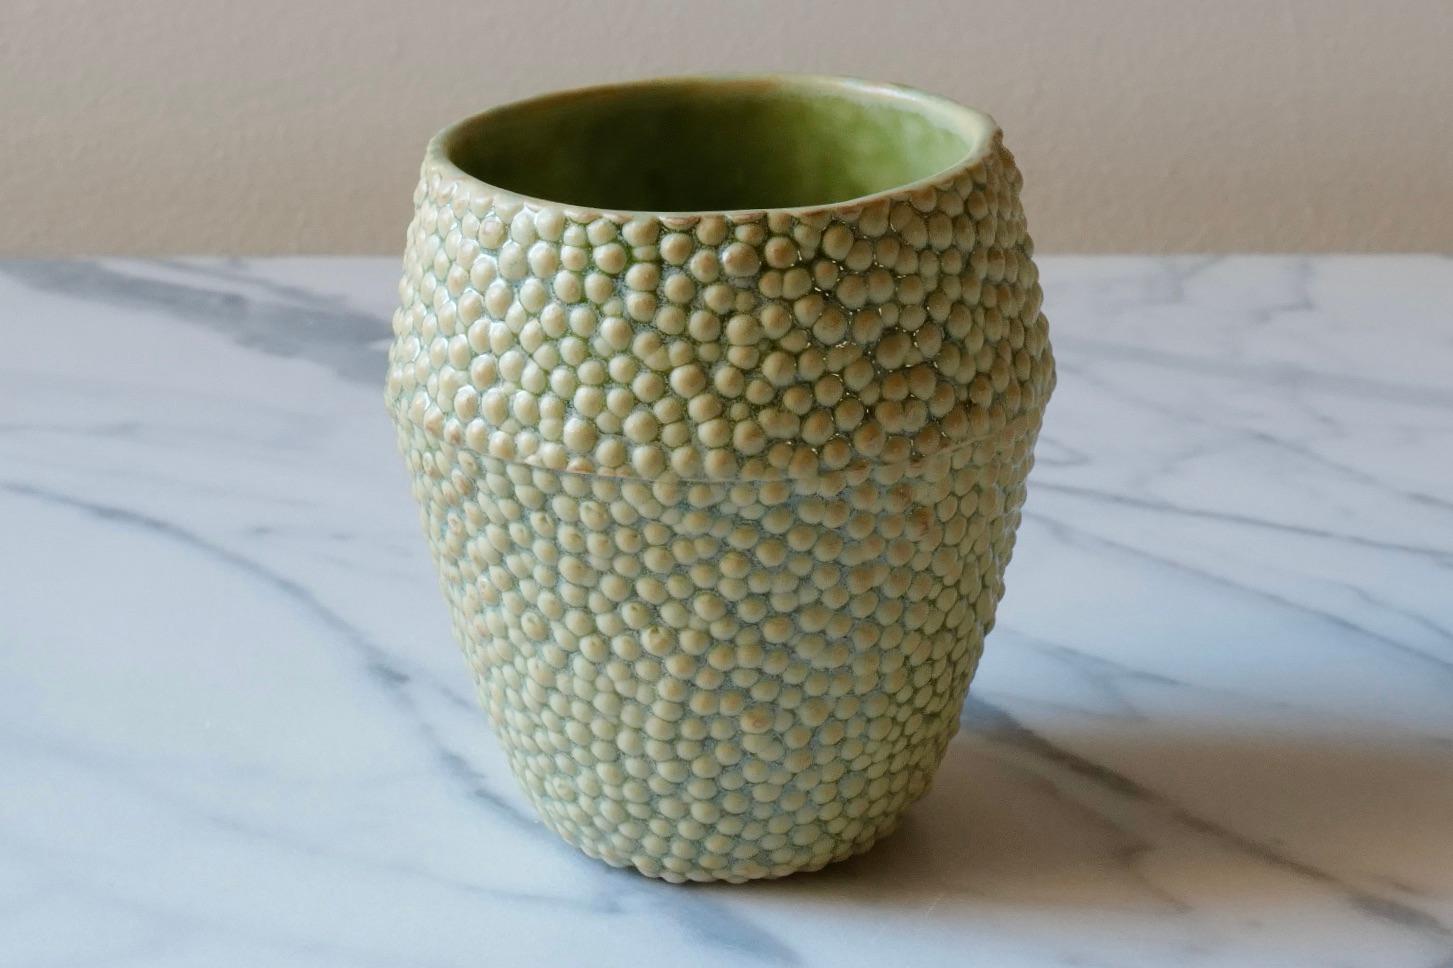 Elegant ceramic drinking cup. Hand-cast in porcelain using a mold hand-carved by the artist. The glaze is an earthy green color that highlights the delicate texture by deepening in color around each spherical form. The ‘caviar’ texture is evocative